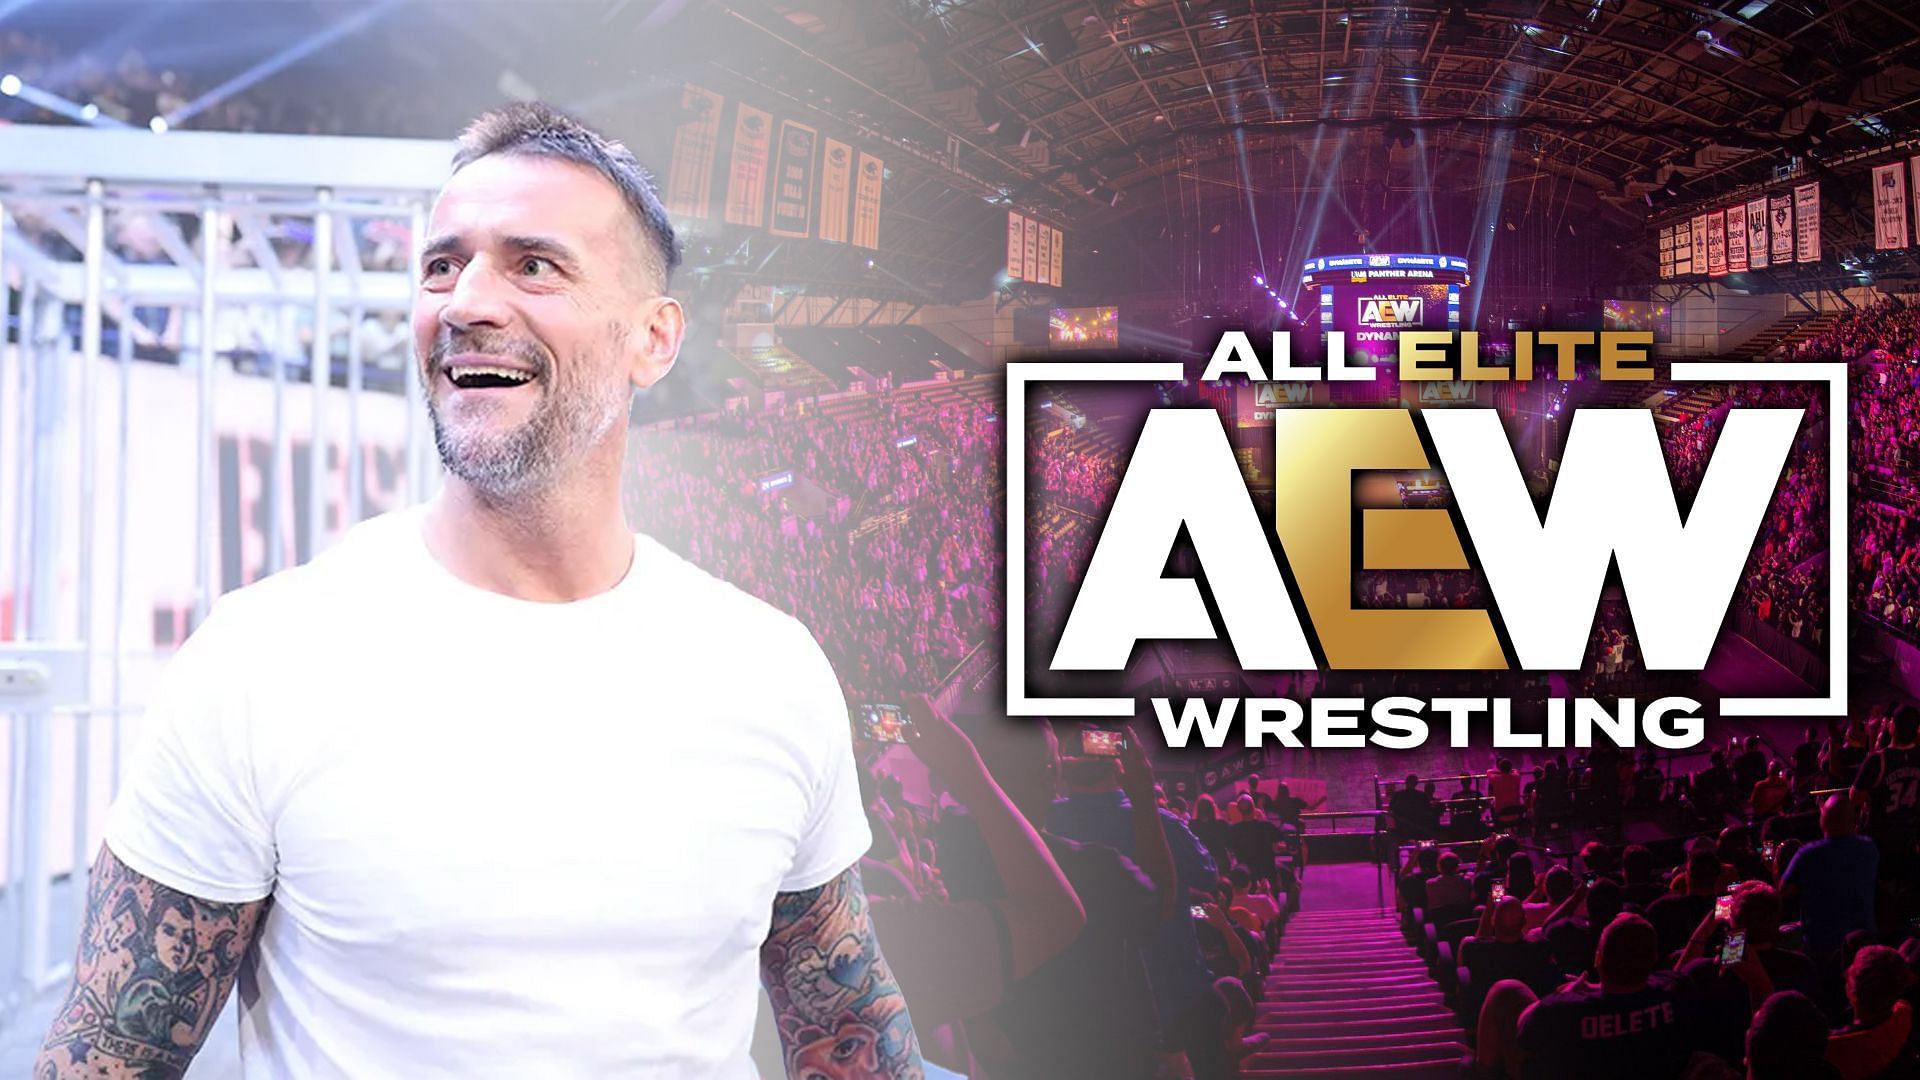 CM Punk returned to WWE after his release from All Elite Wrestling